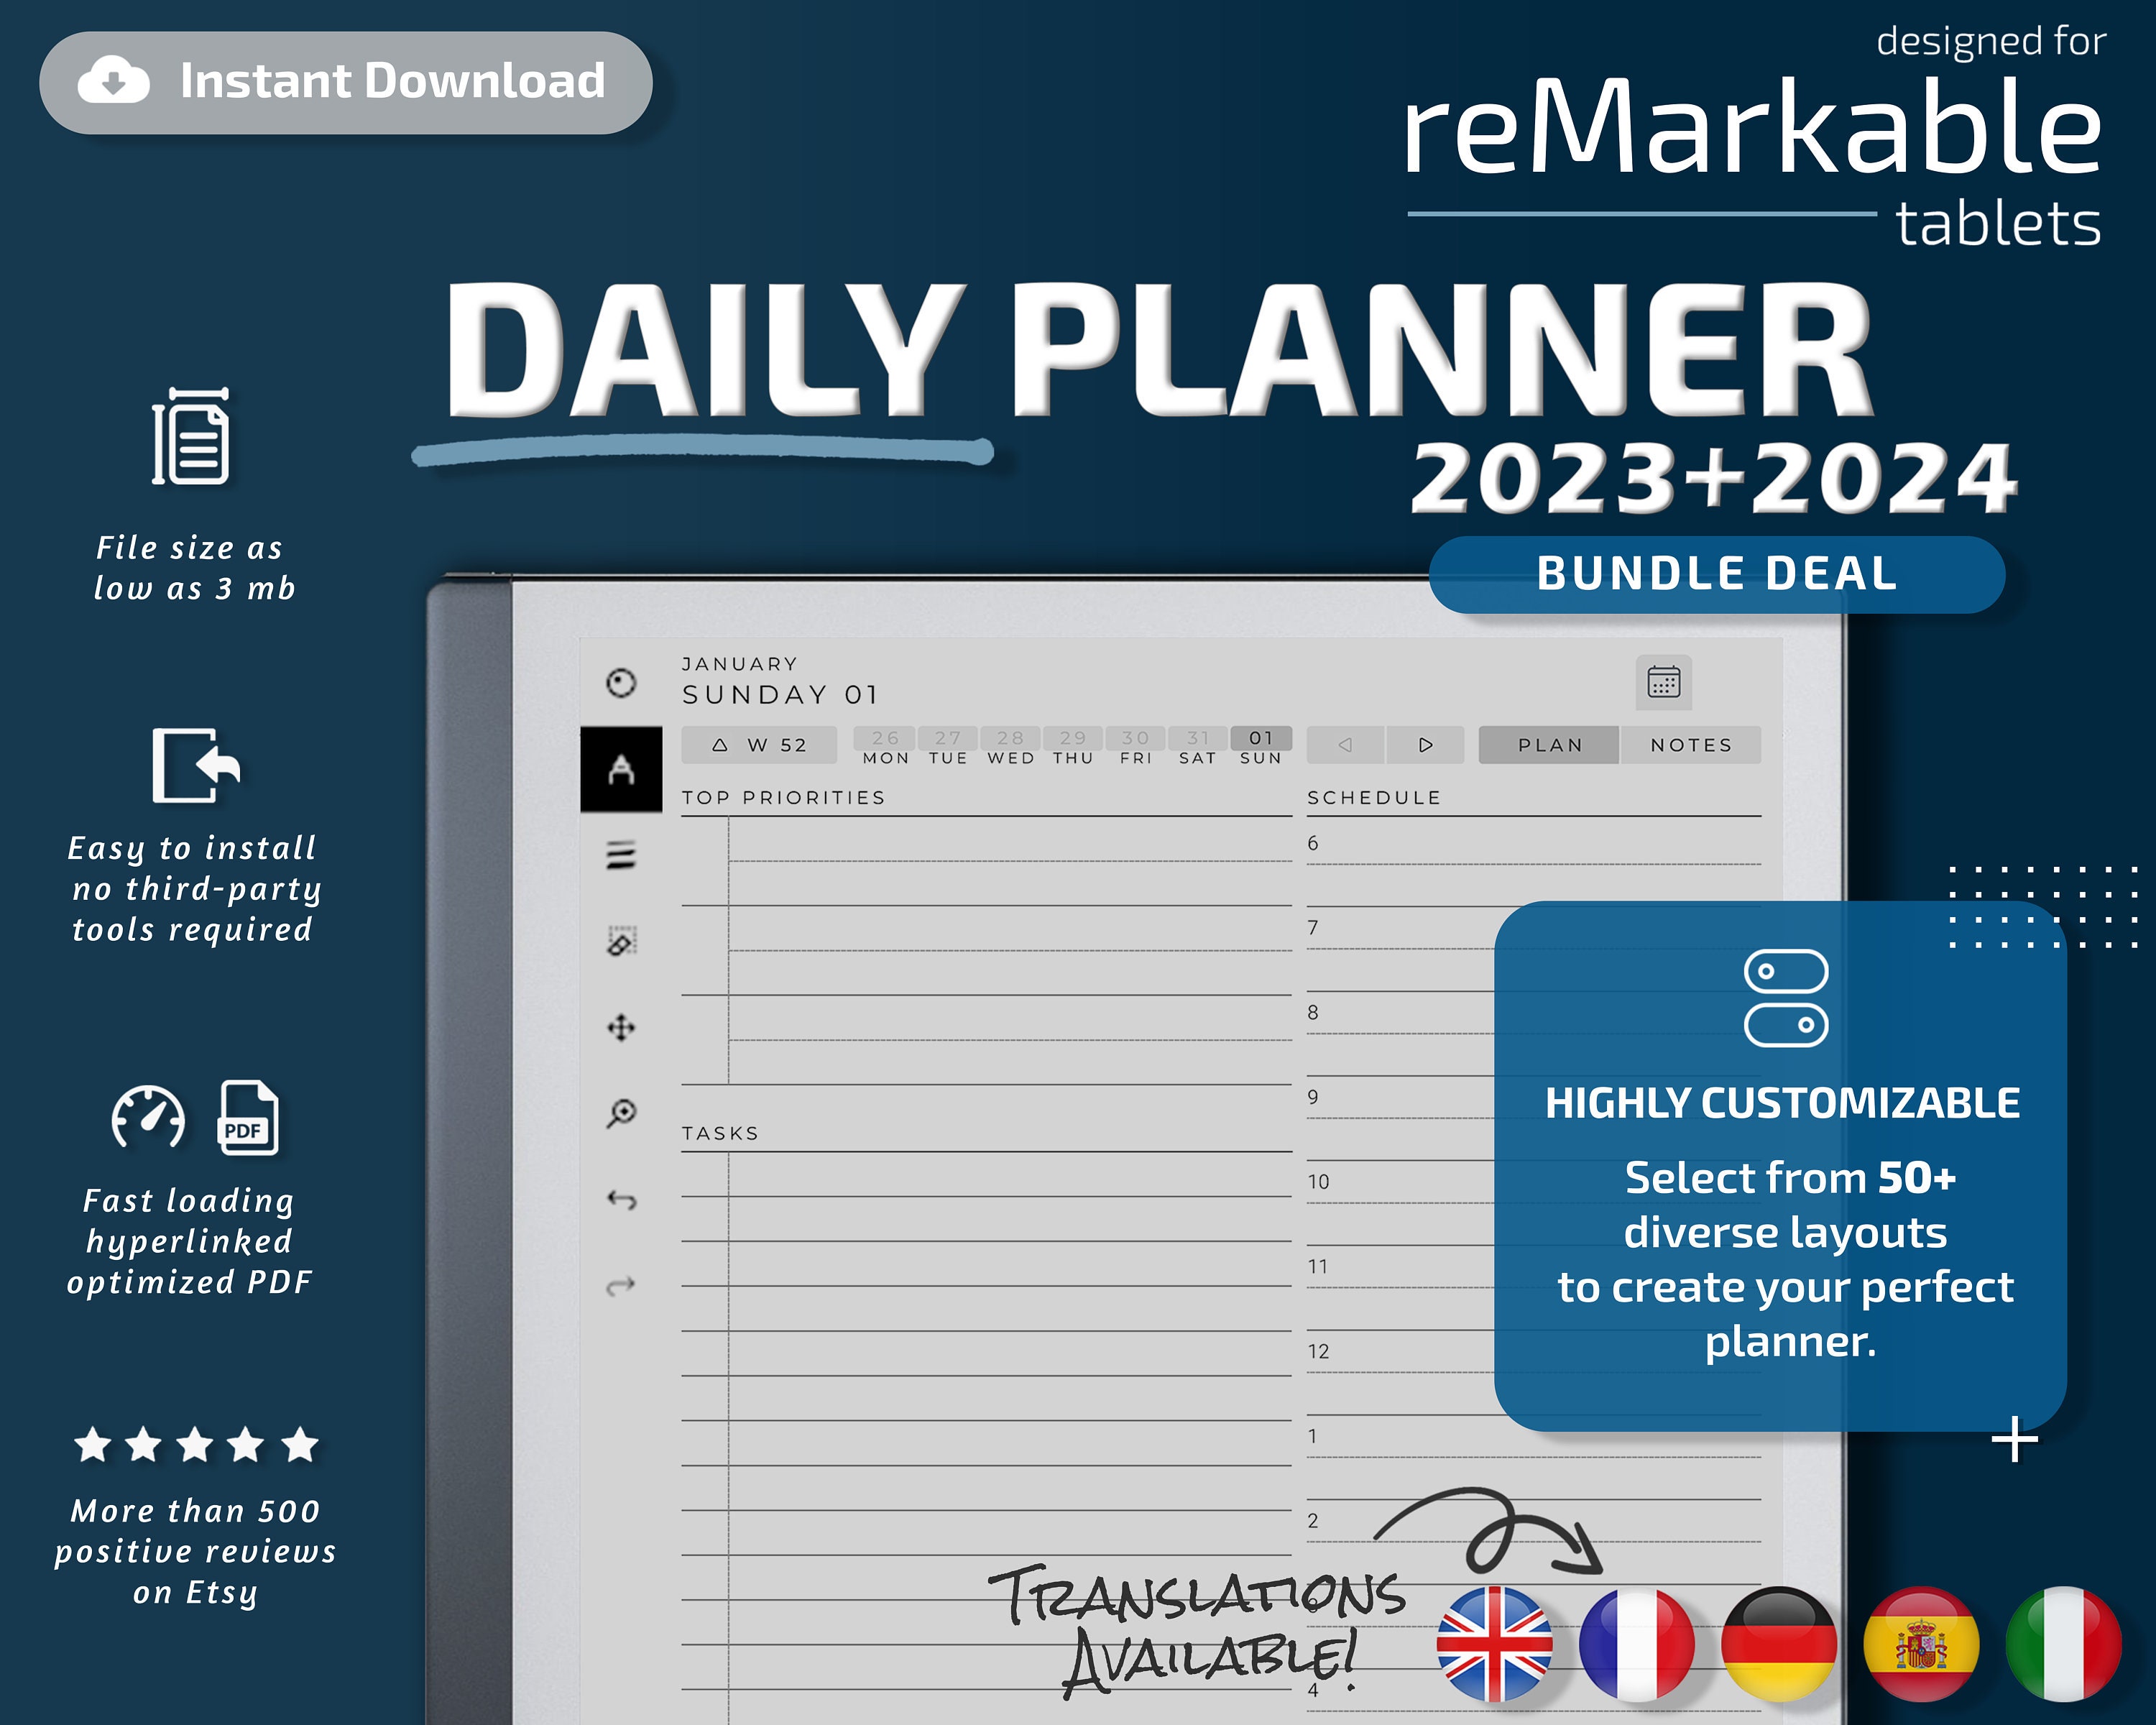 Remarkable 2 Daily Planner Standard Edition 2023 2024 photo